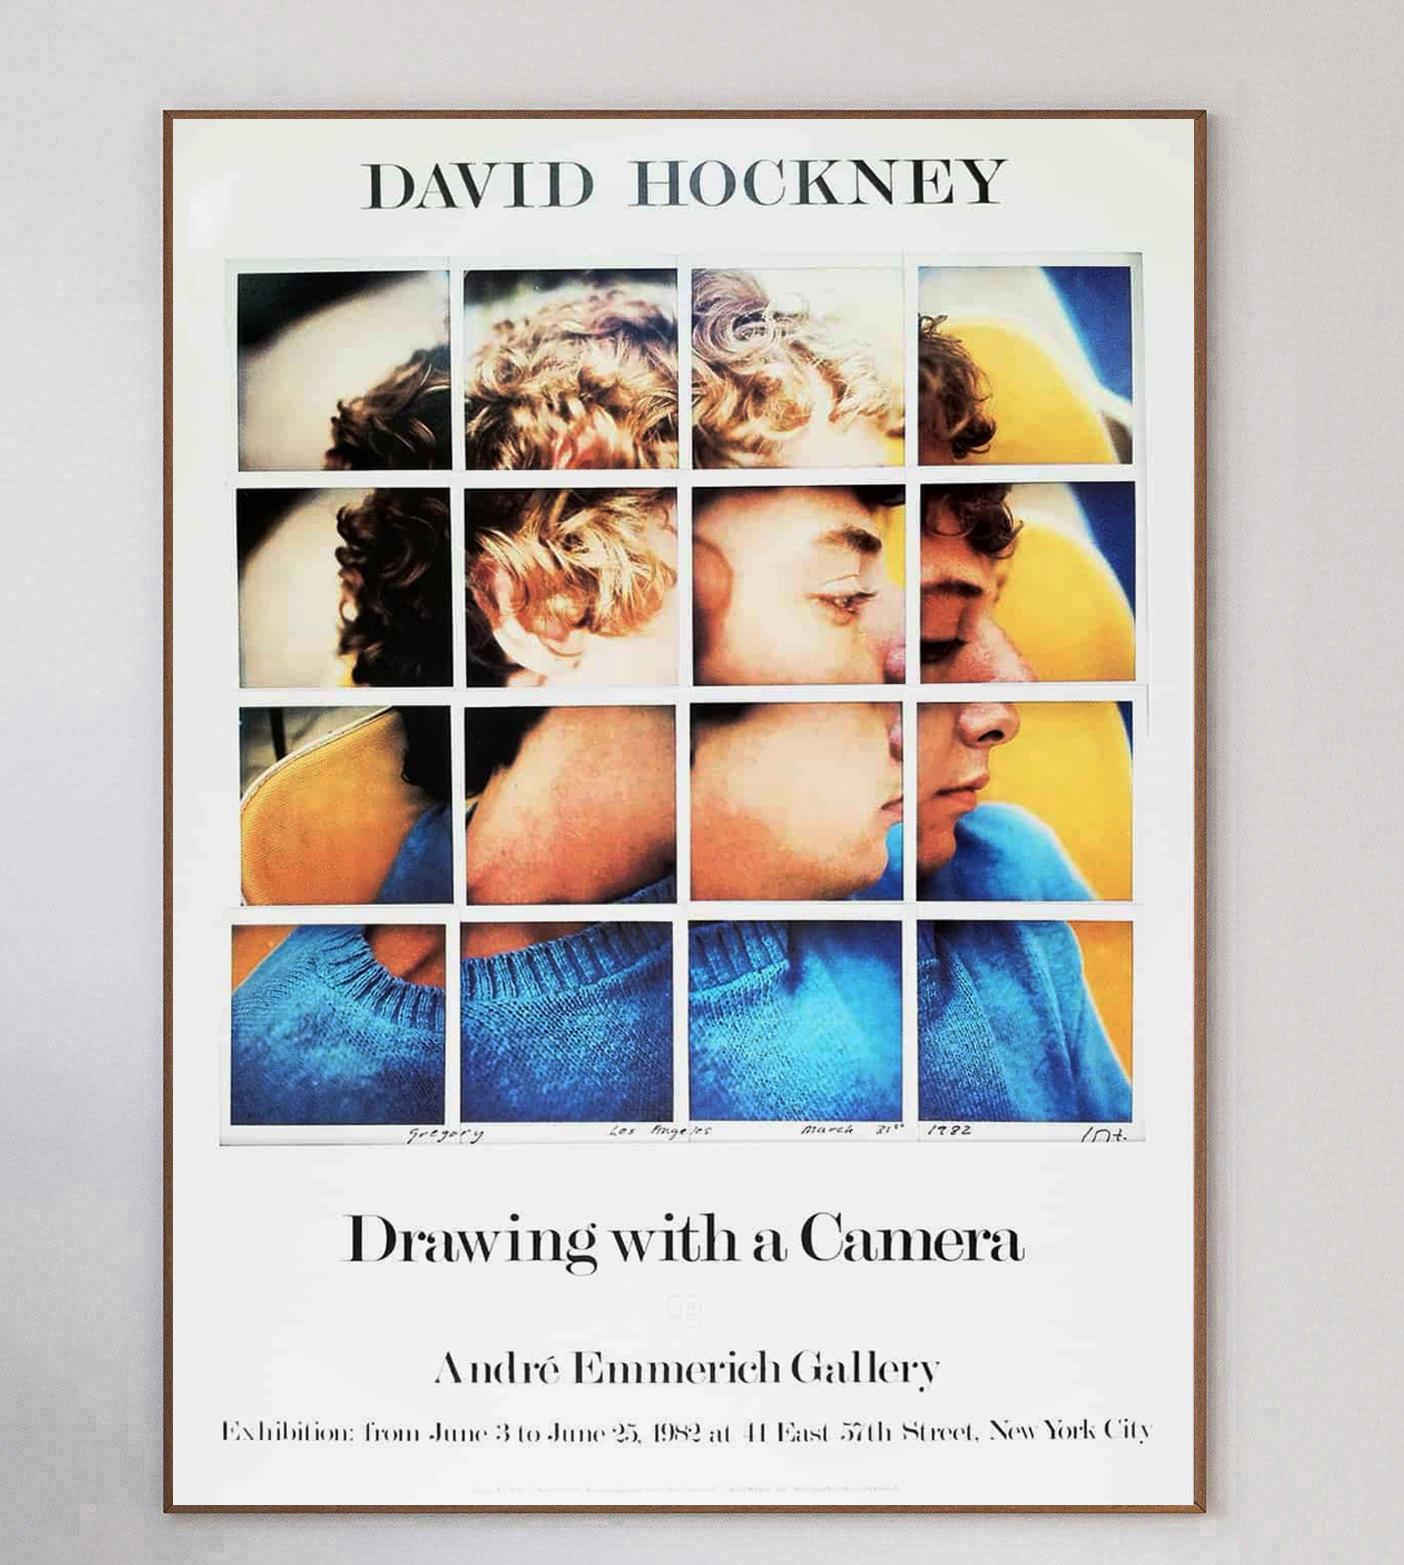 This wonderful poster promotes the David Hockney exhibition 